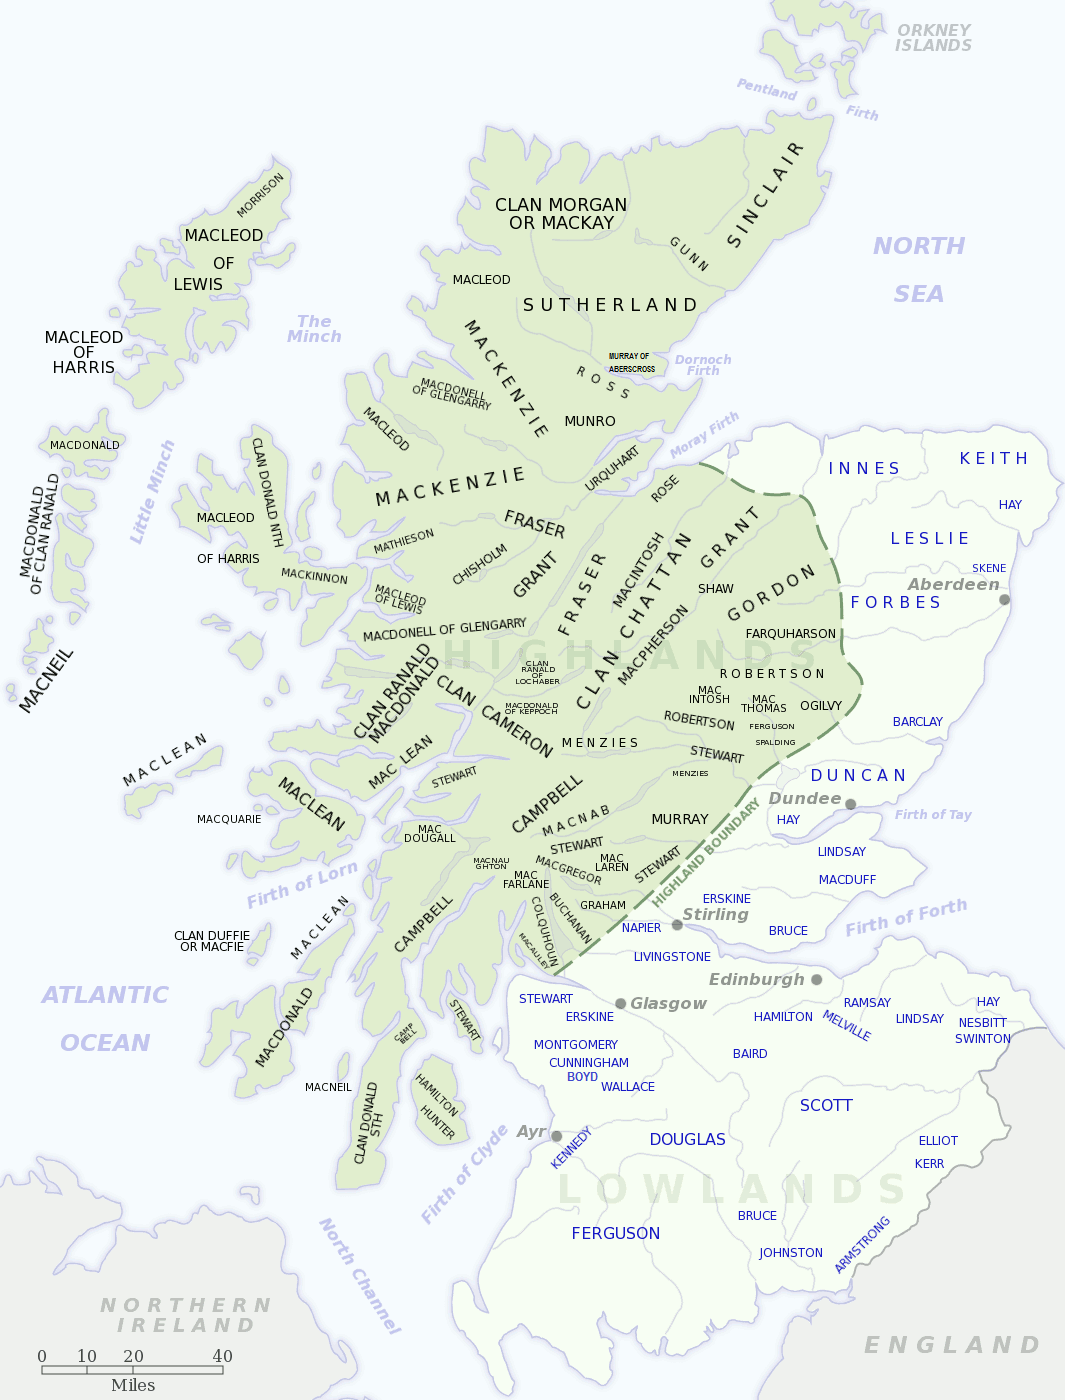 Originally based on the "Clan Map of Scotland" from The Scottish Clans & Their Tartans, W. & A.K. Johnston, 1939.